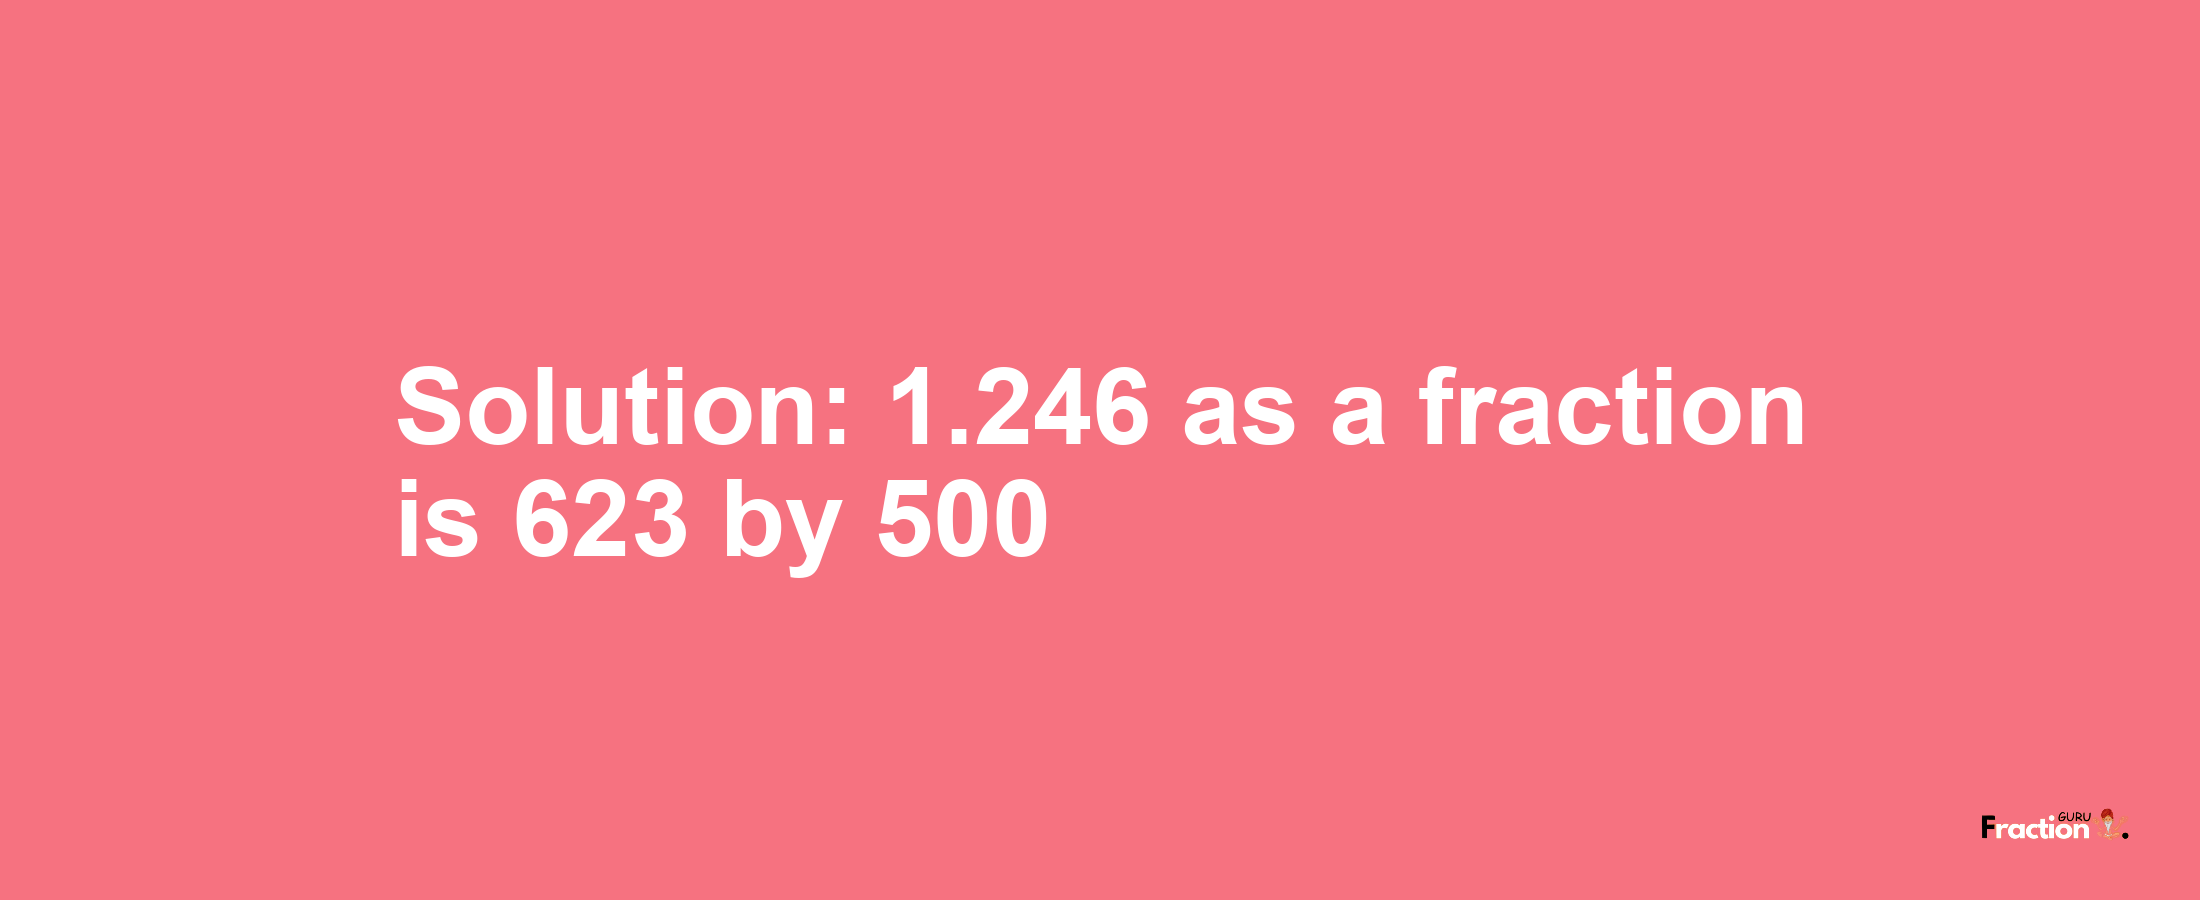 Solution:1.246 as a fraction is 623/500